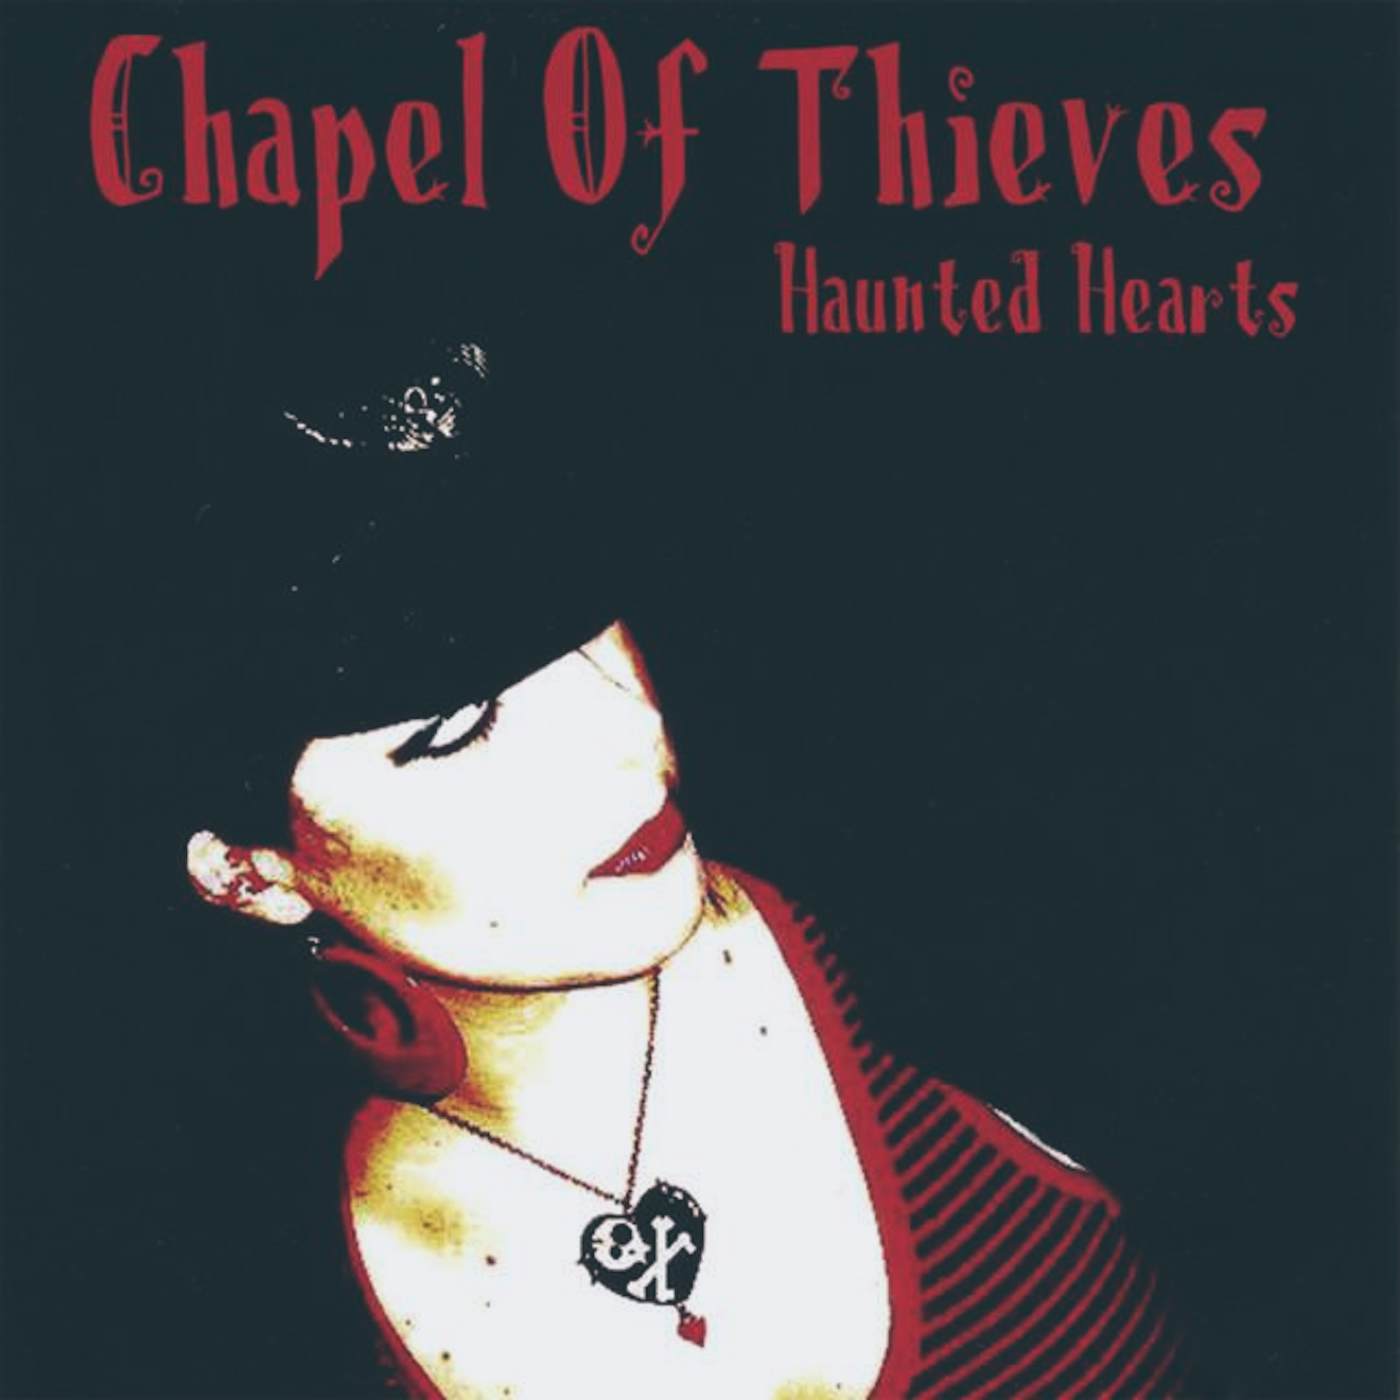 Chapel of Thieves